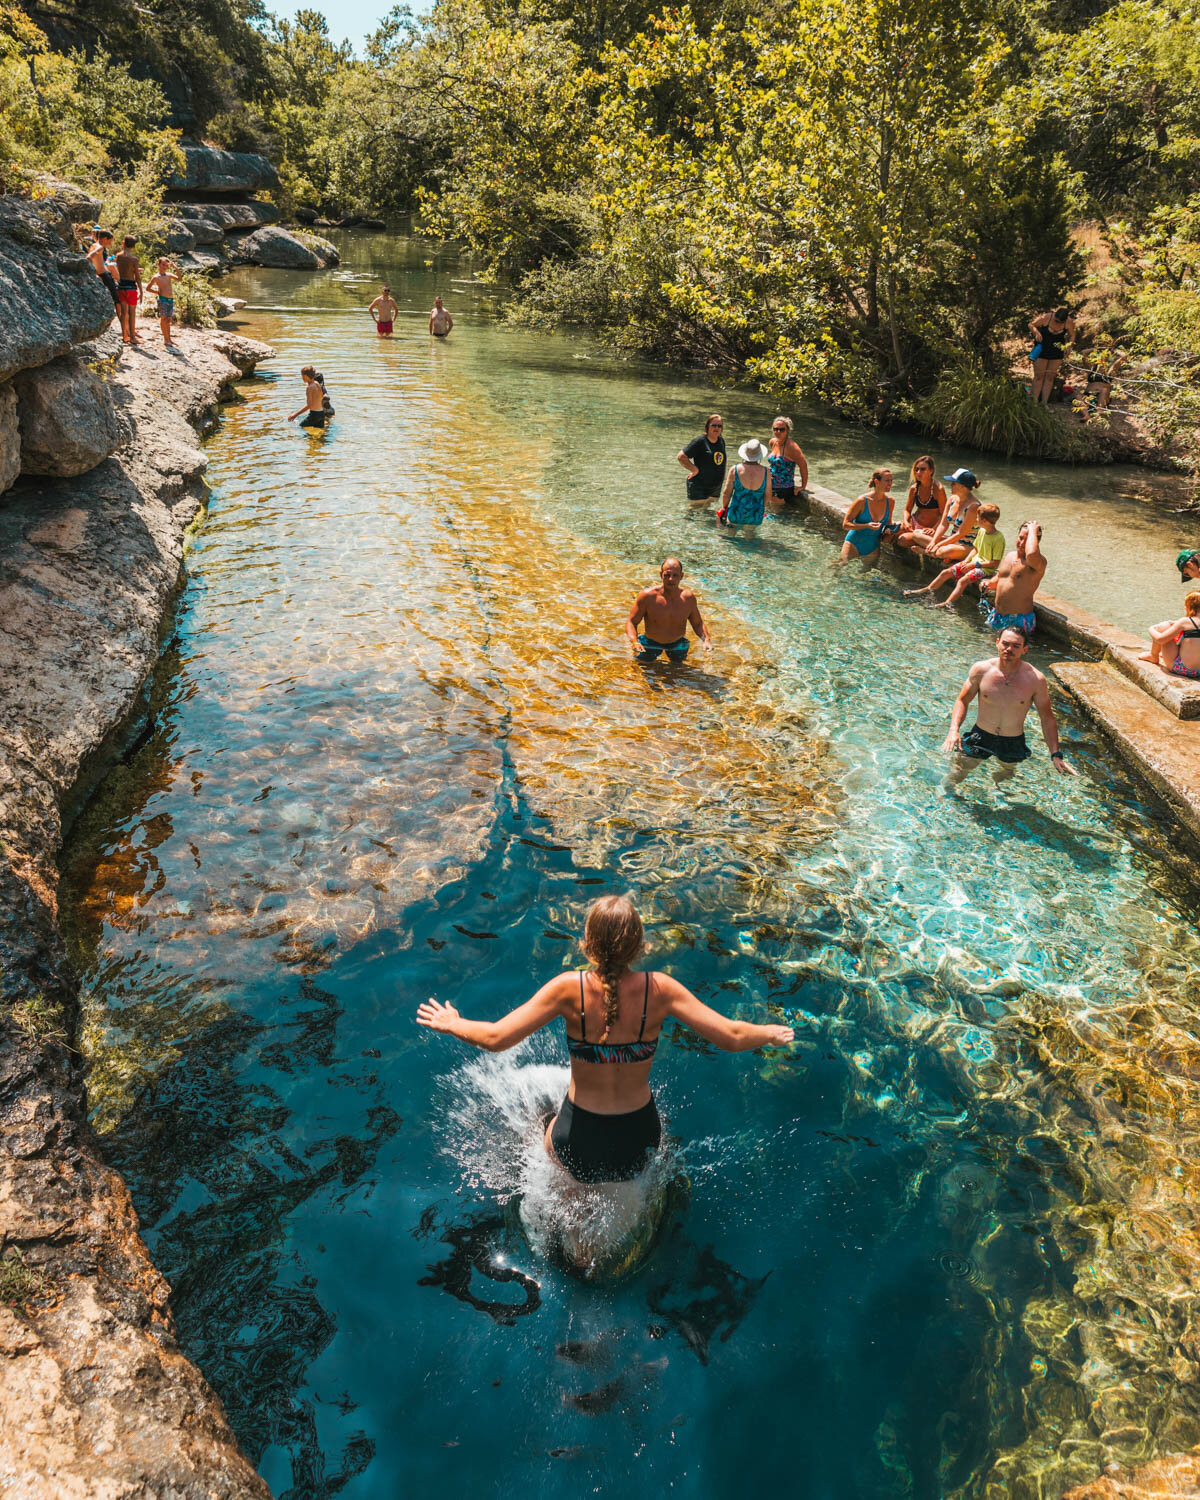 How To Visit Jacob's Well Natural Area in Wimberley, Texas // One of the best swimming holes in the Central Texas Hill Country!